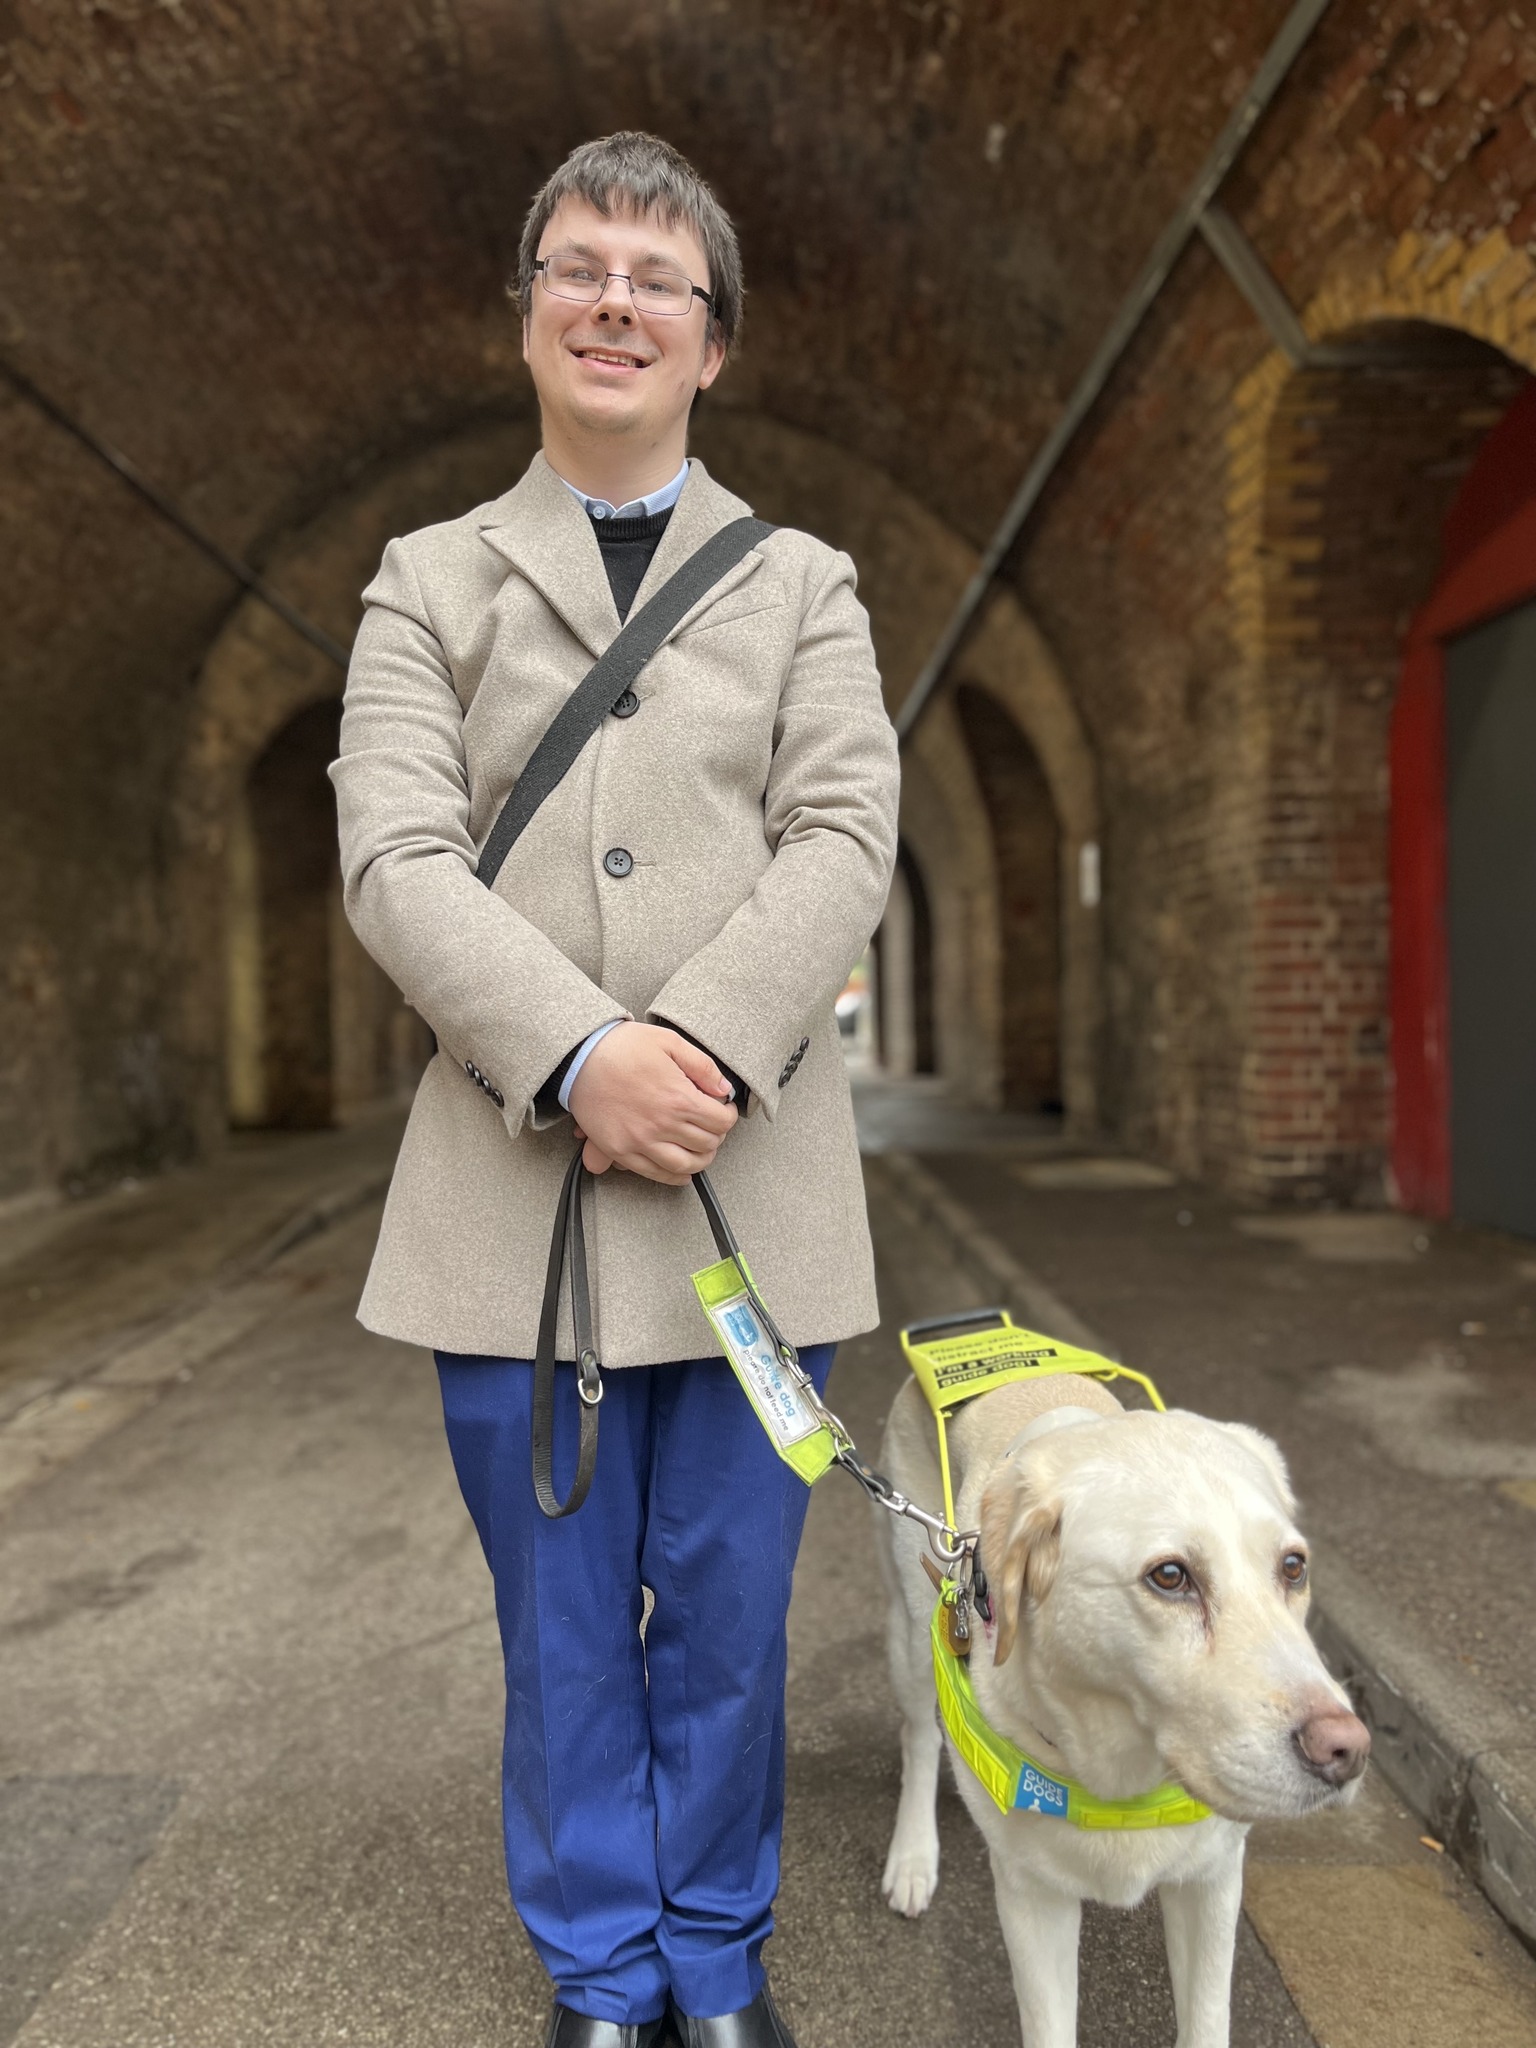 Alex Ramzan, Essex Sight Loss Council member, pictured with his guide dog. He is smiling.